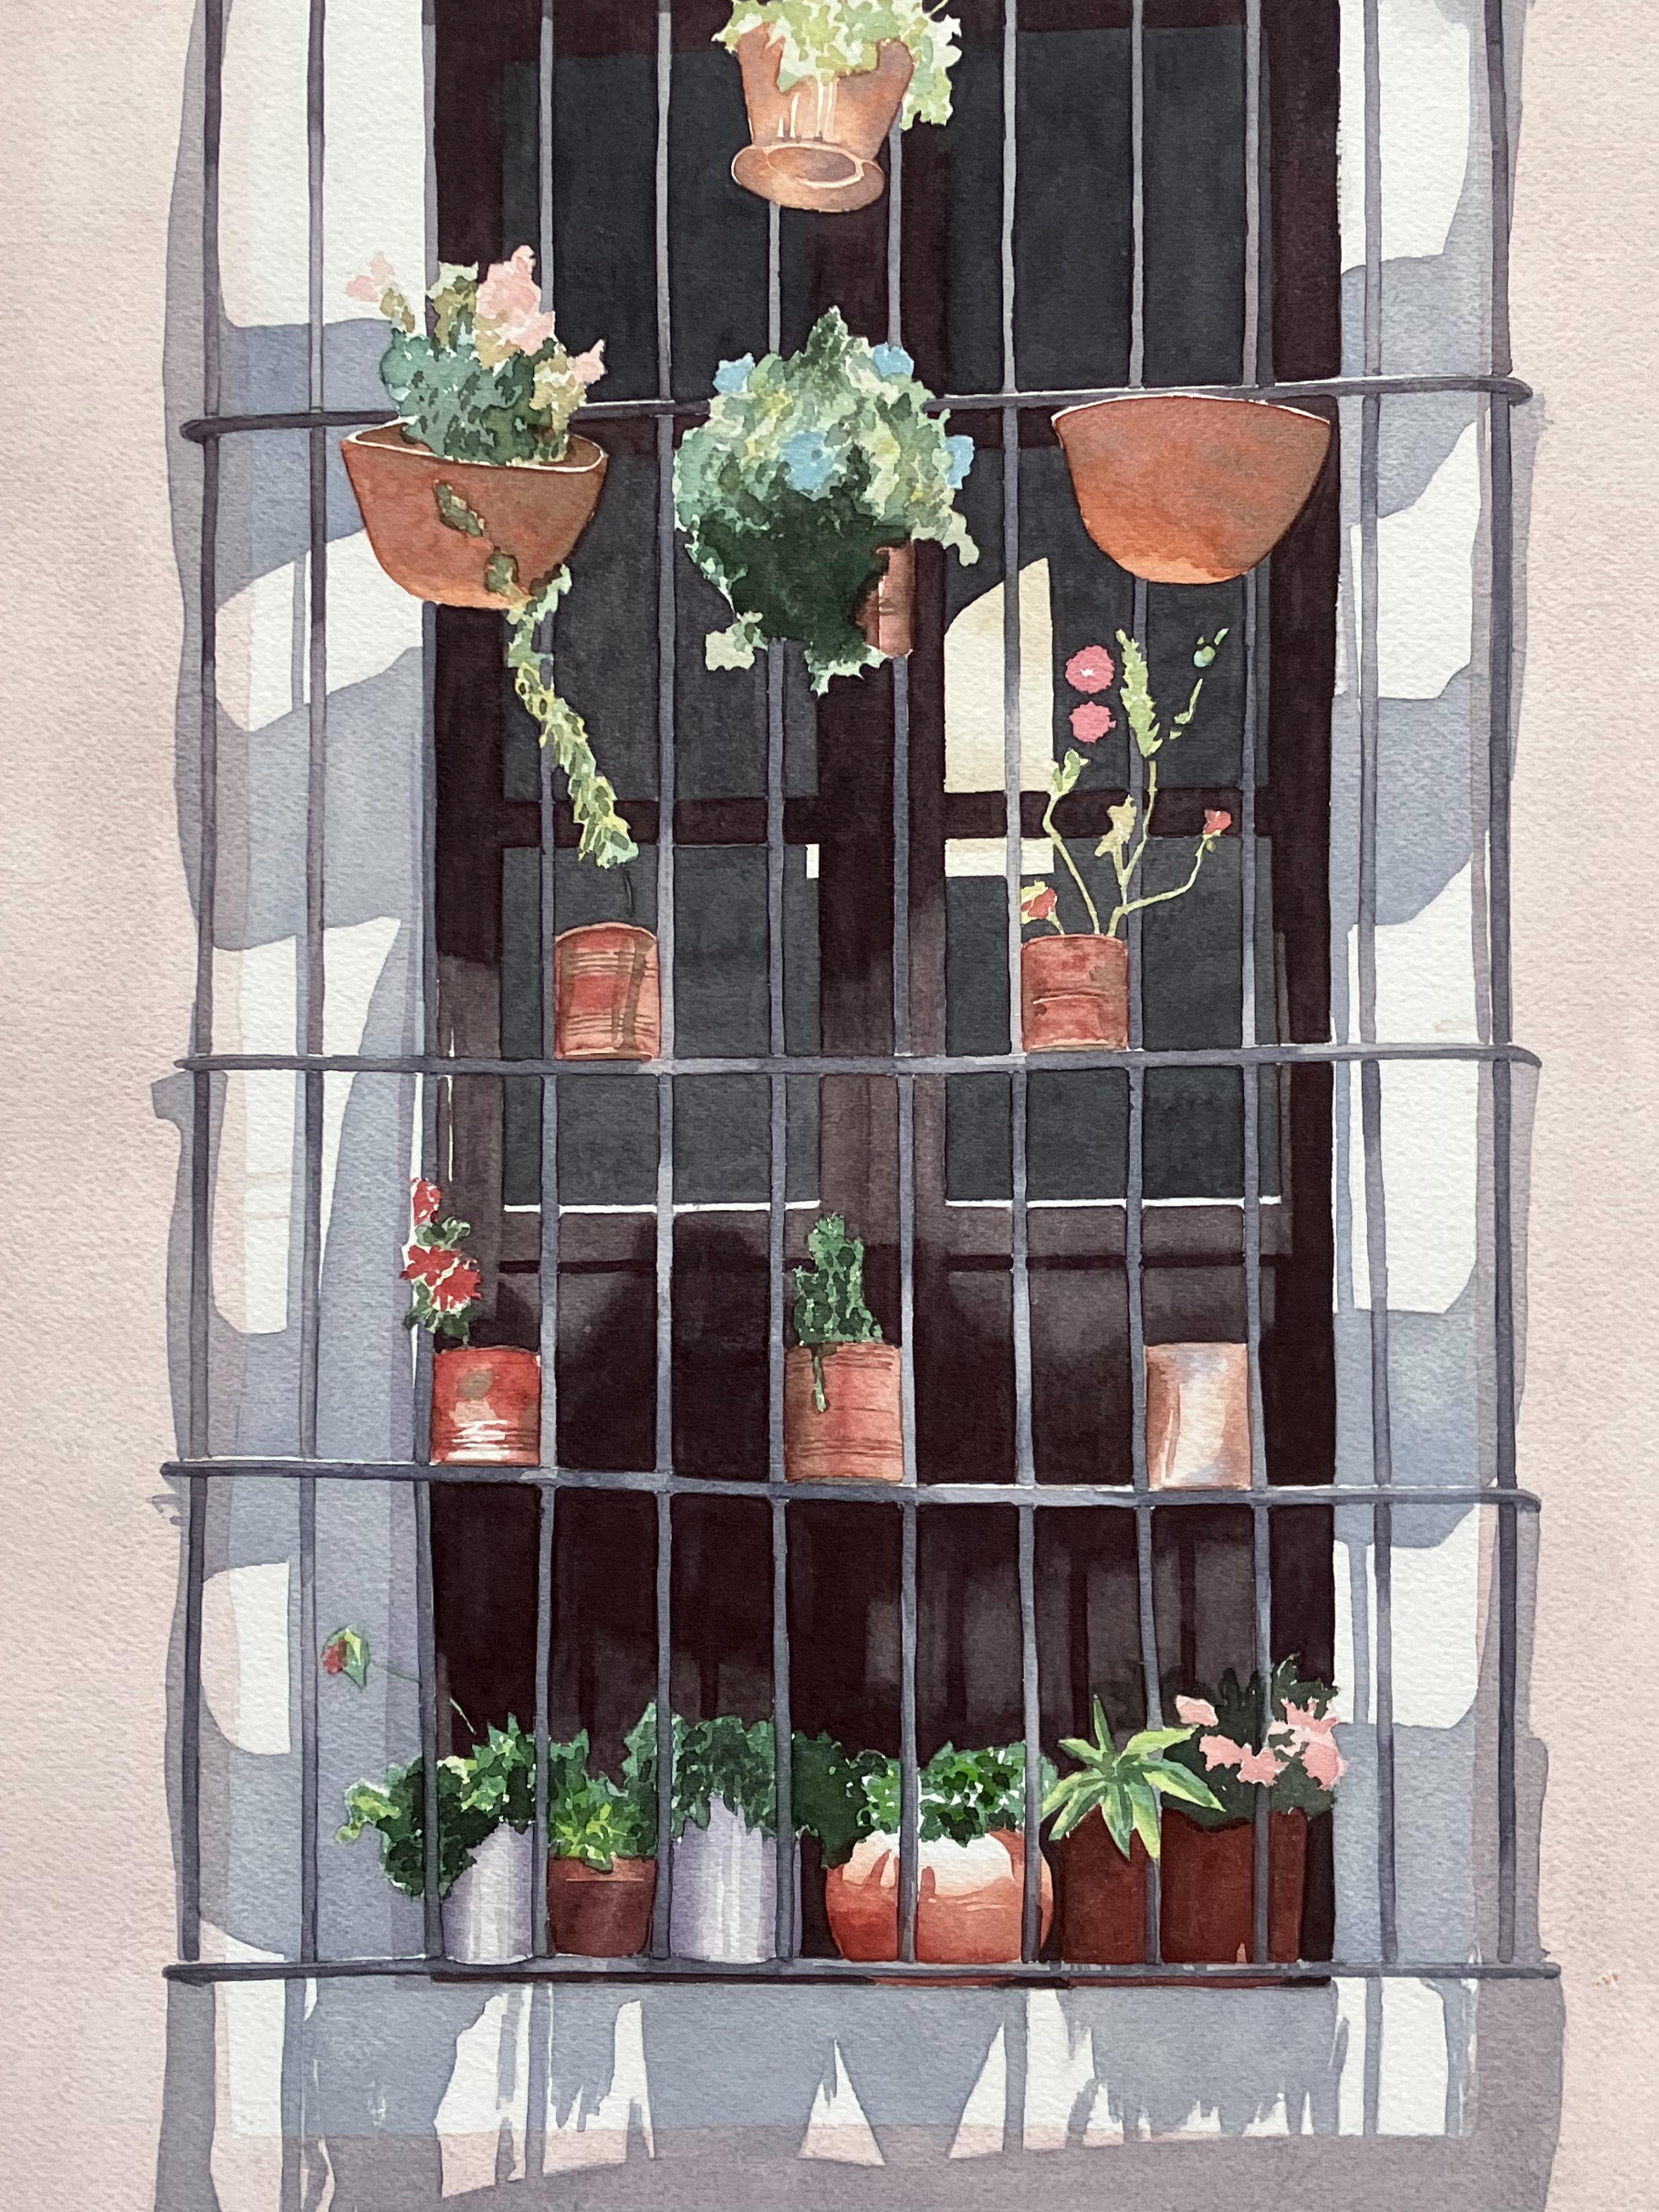 Artist: Evelyne Brigeois – French/American (1946-2016)
Title: Guanajuato
Year: ca. 1980
Medium: Watercolor 
Sight size: 20.5 x 14 inches. 
Matted size: 27.5 x 20 inches 
Signature: Signed lower right
Condition: Very good 
Unframed

This watercolor